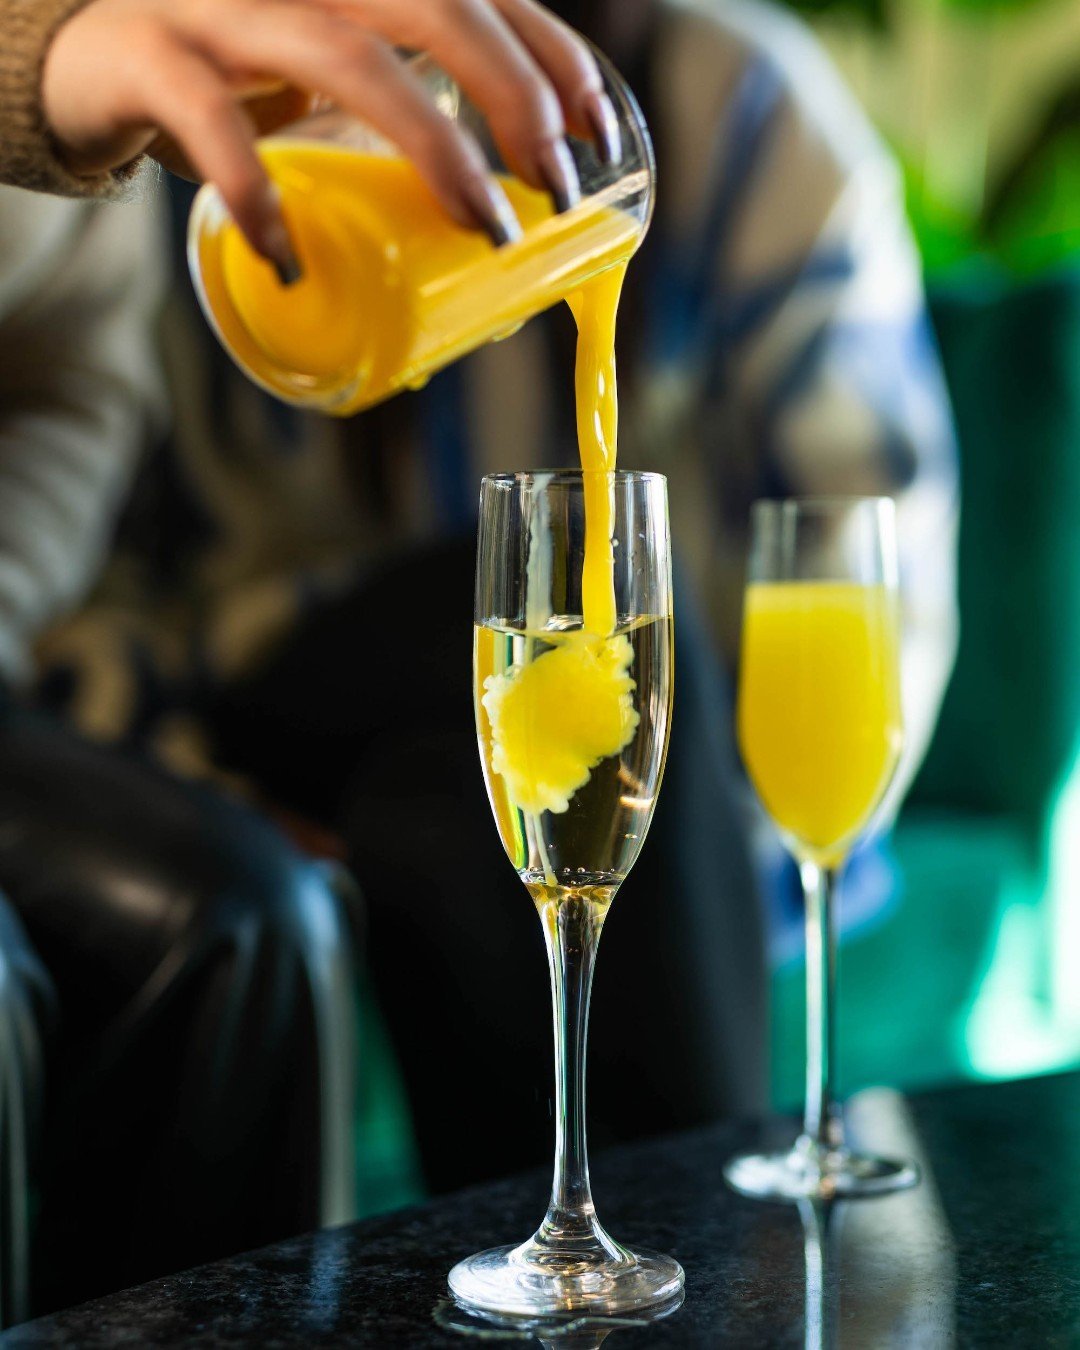 At Creme, we turn mornings into celebrations! Sip on our bubbly mimosas and let the good times roll. 🎉🥂